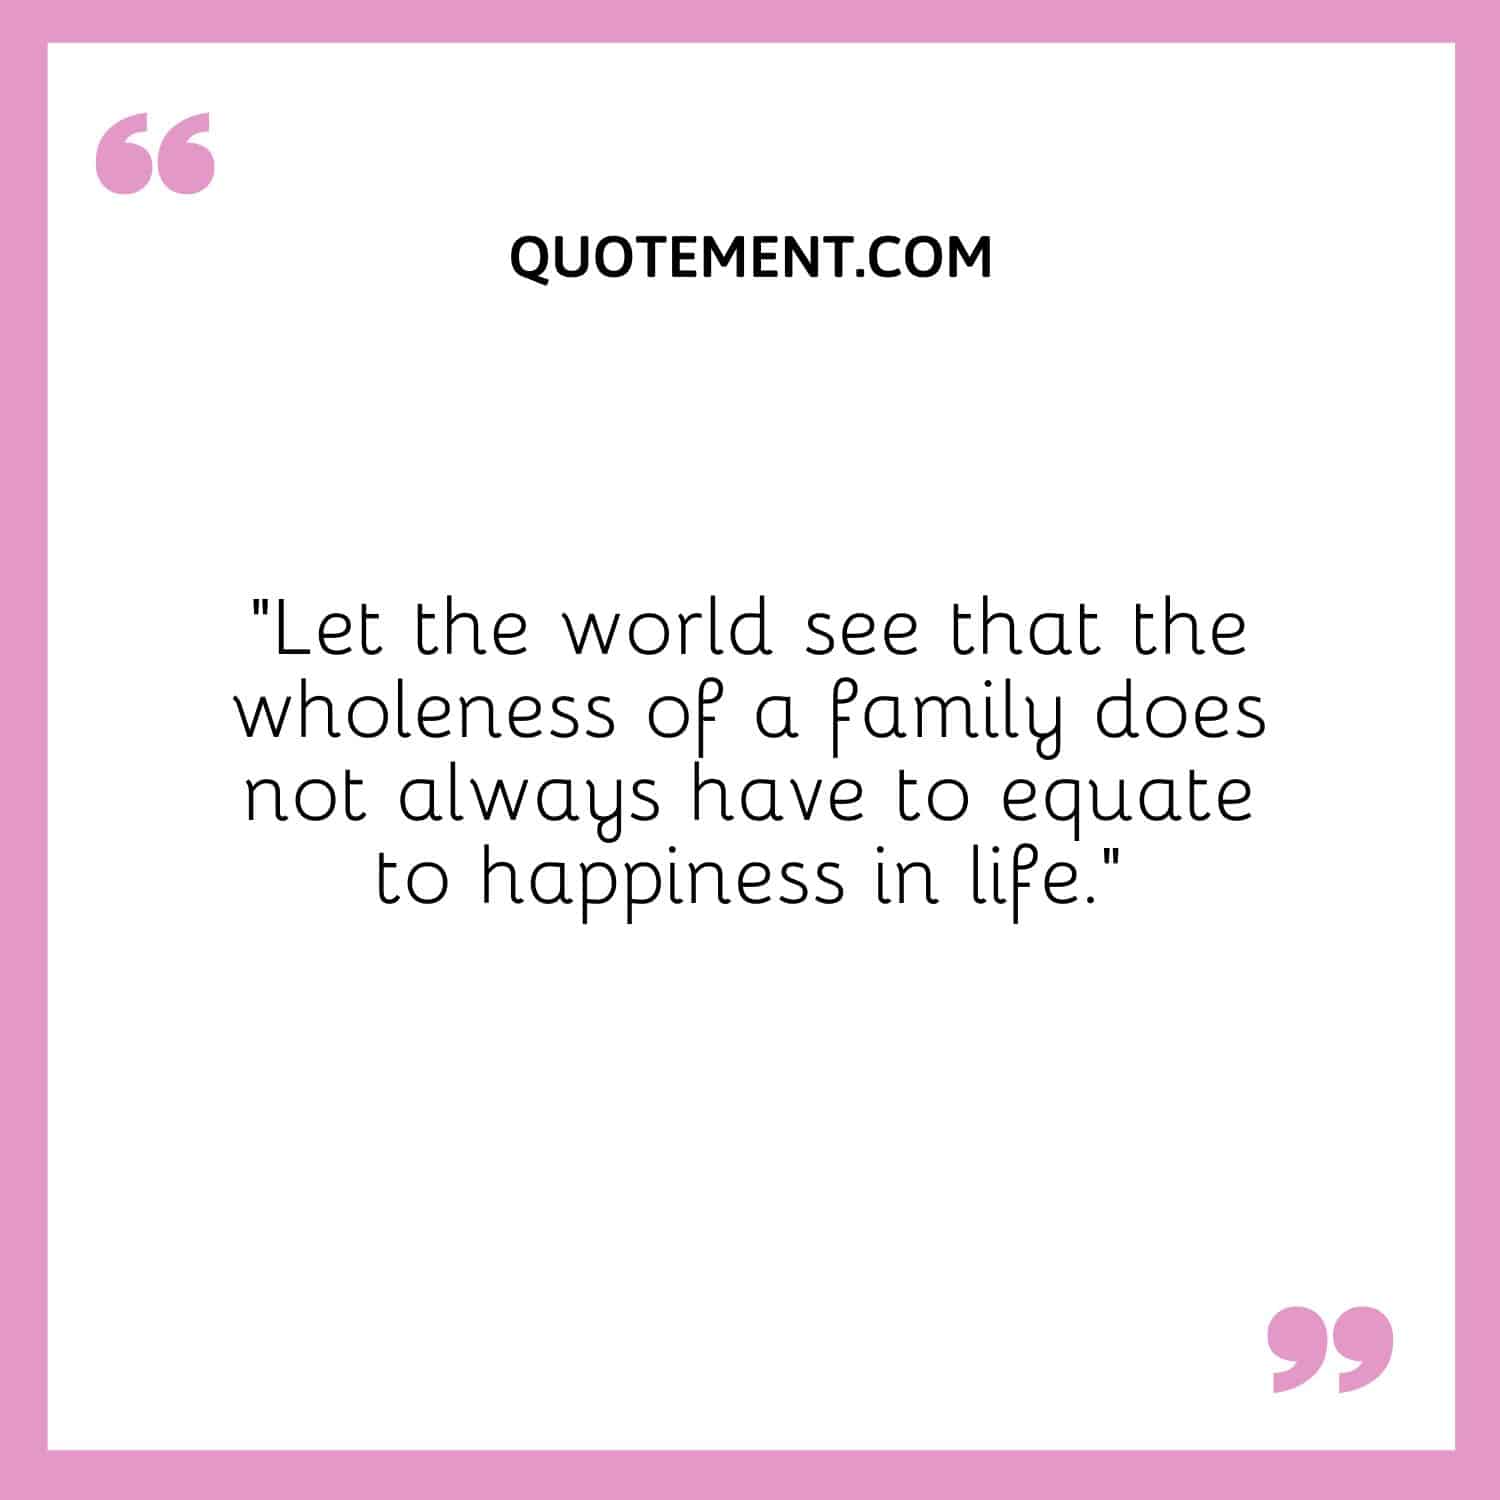 Let the world see that the wholeness of a family does not always have to equate to happiness in life